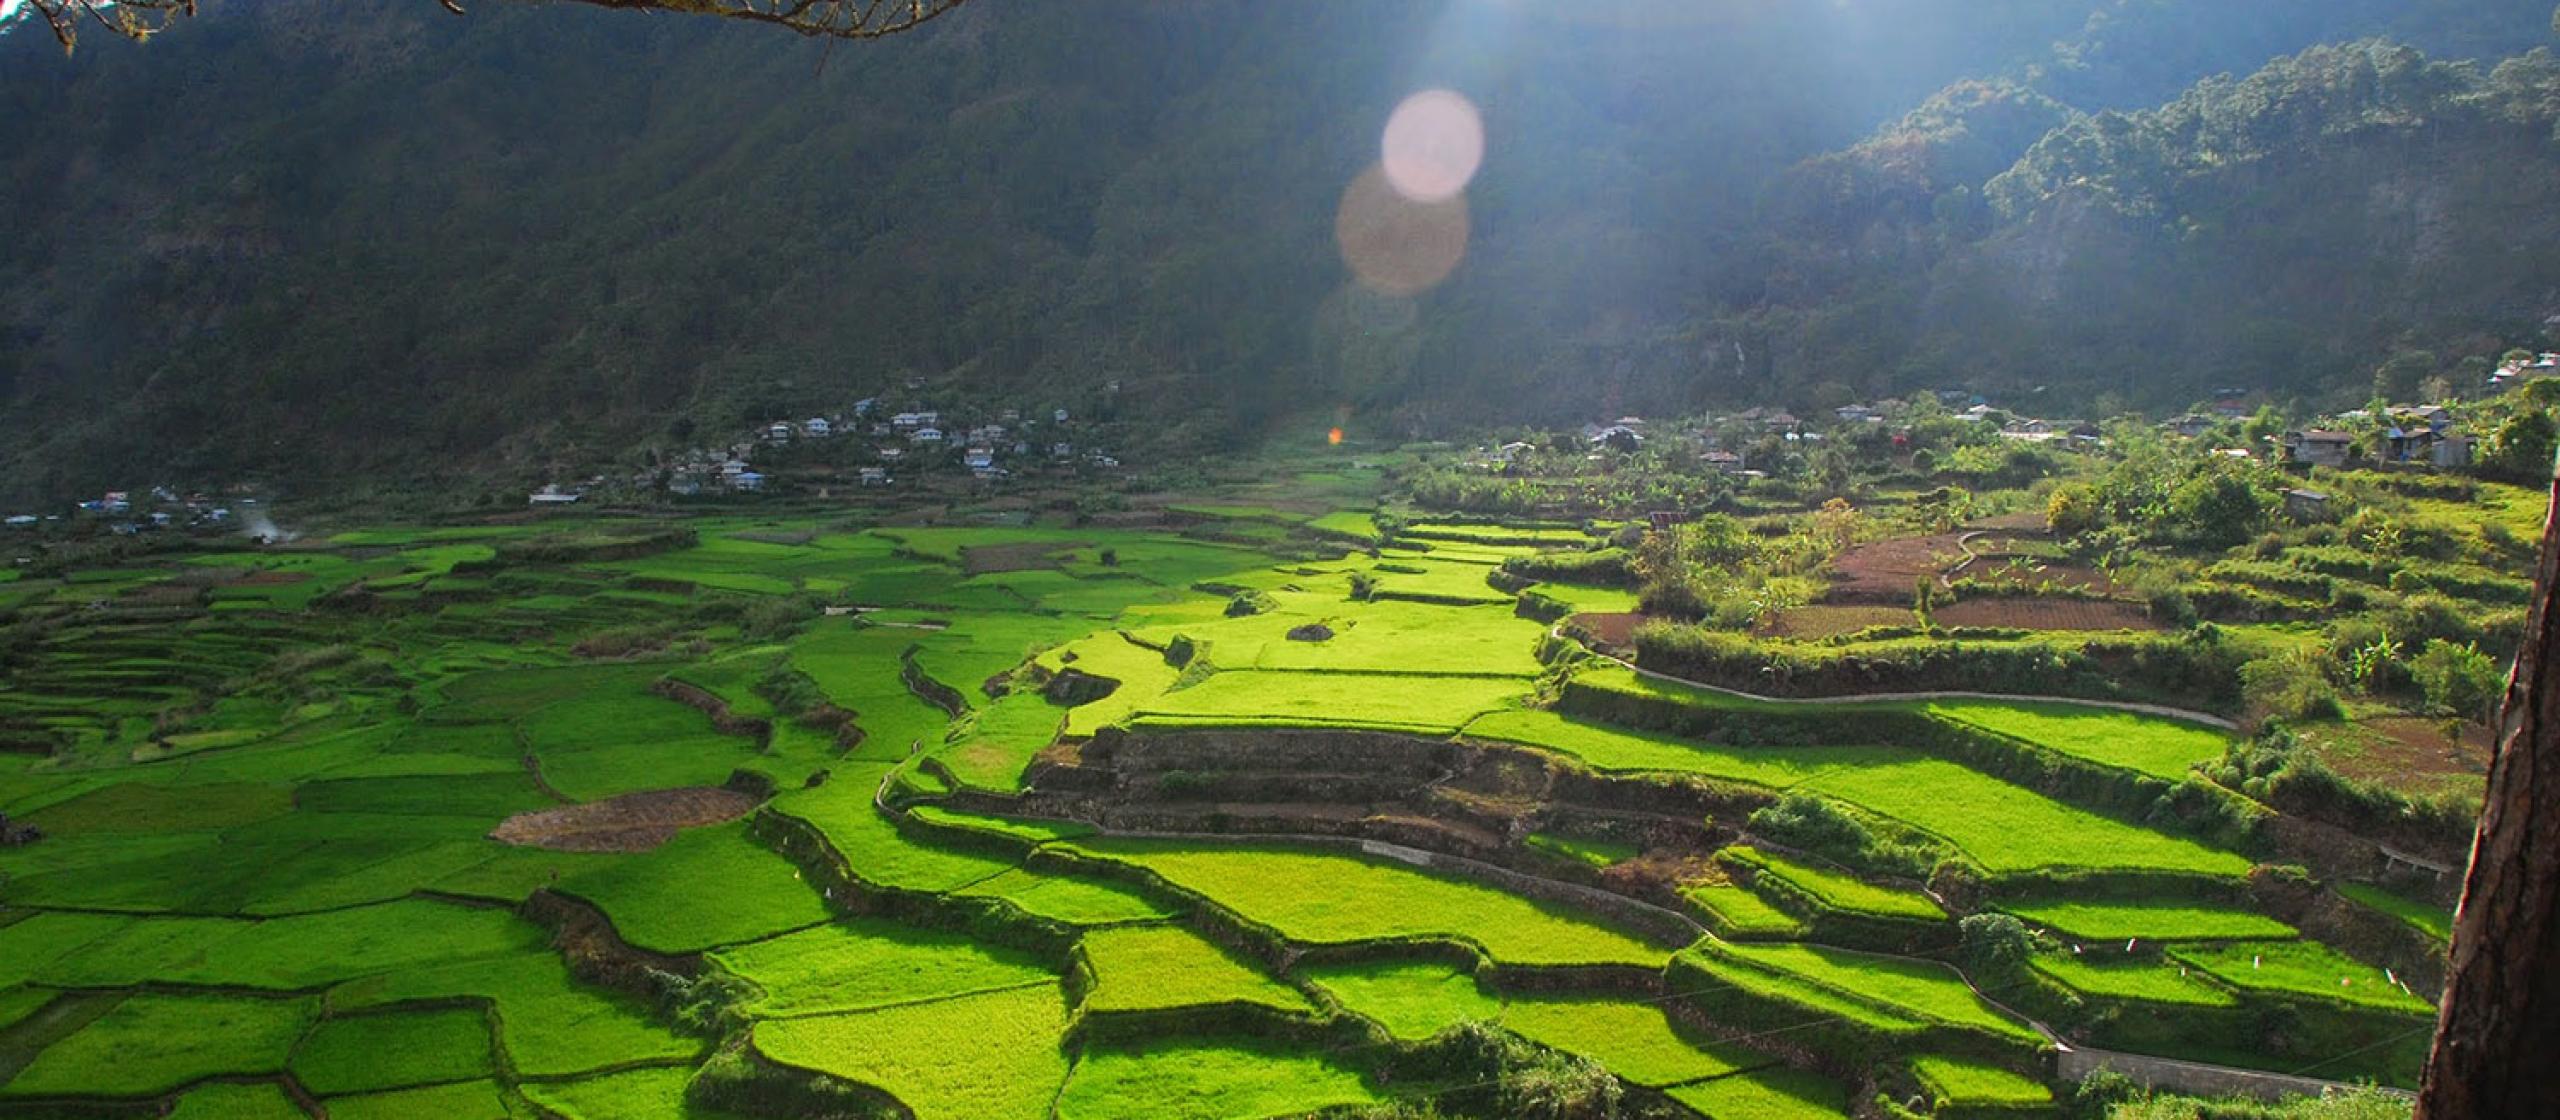 Cascading green fields in the Philippines